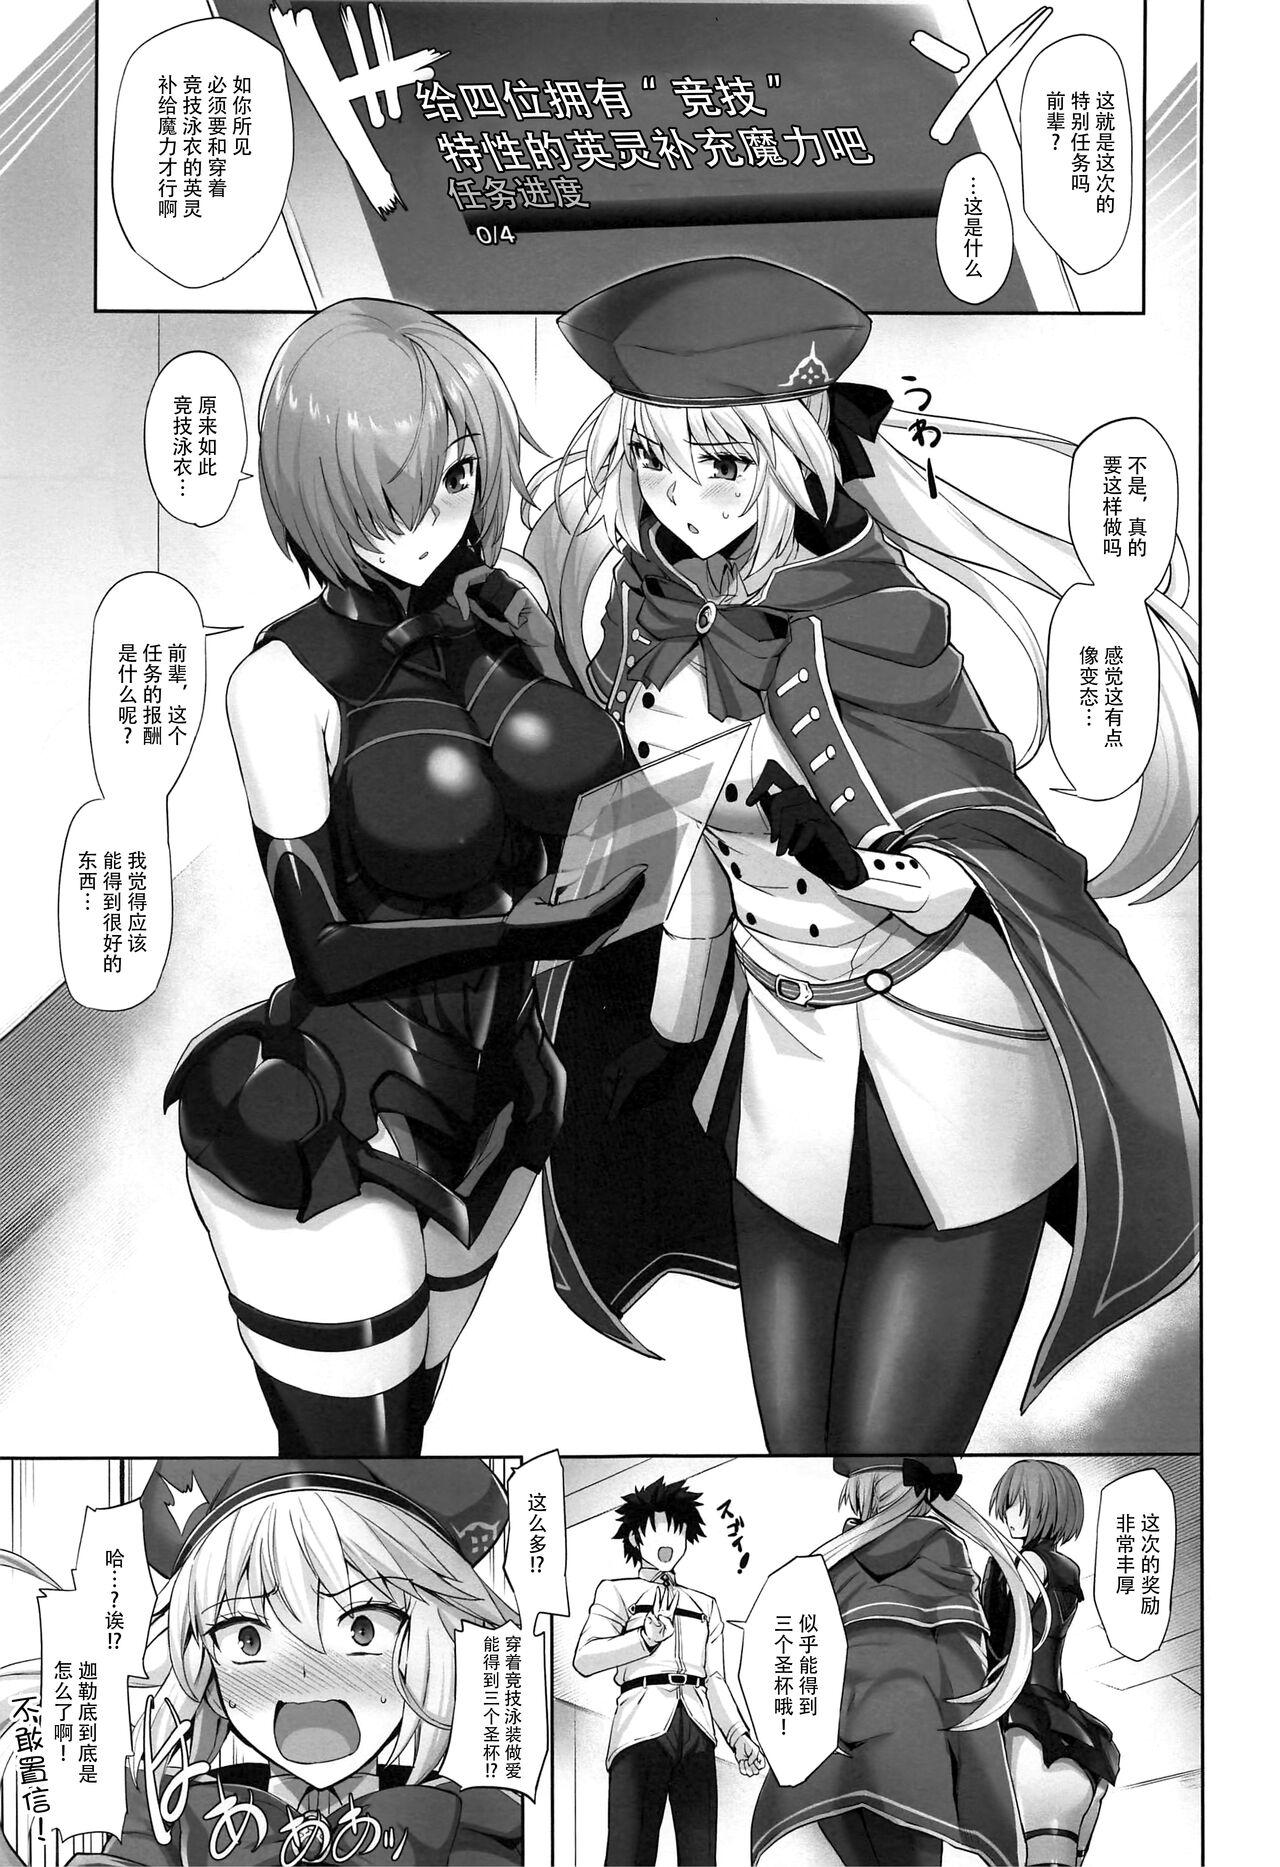 Hot Couple Sex Kyouei Tokusei no Servant to 2 - Fate grand order Camsex - Page 2